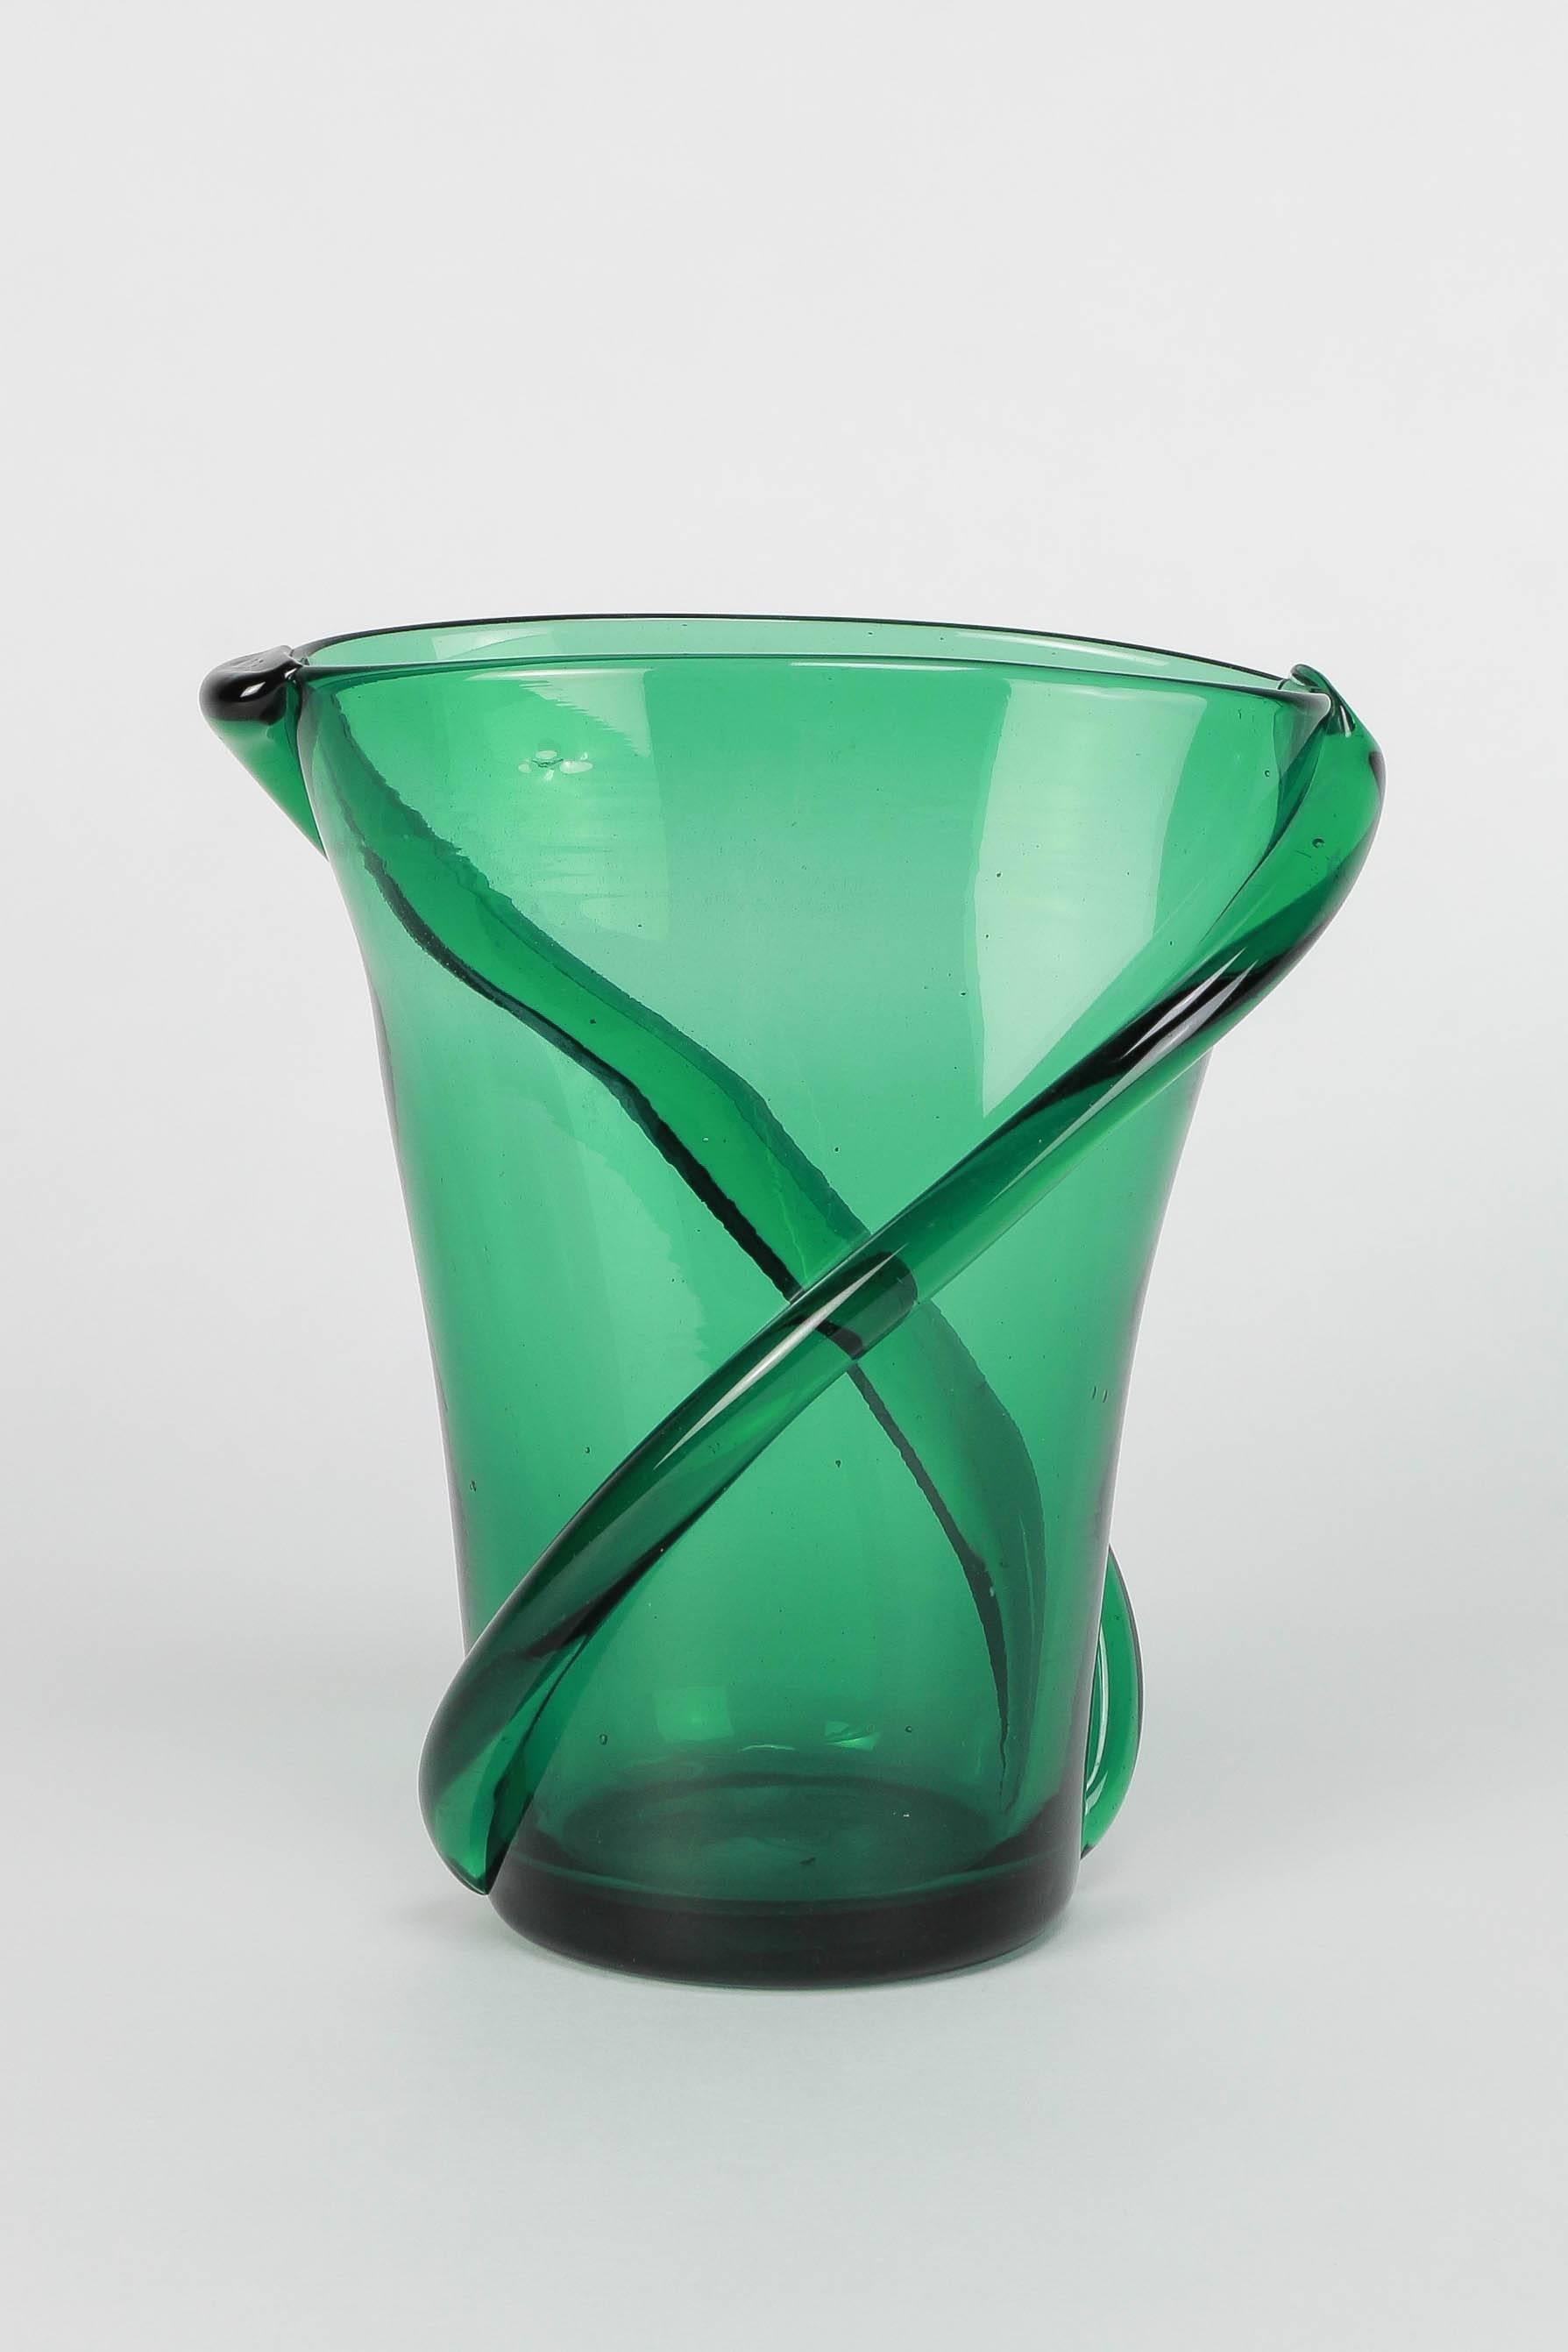 A gorgeous Italian glass vase manufactured in Empoli in Italy in the 1960s. Mouth-blown glass in a vibrant green color and wonderful twisted glass stripes. High-end craftsmanship, polished pontil mark on bottom.